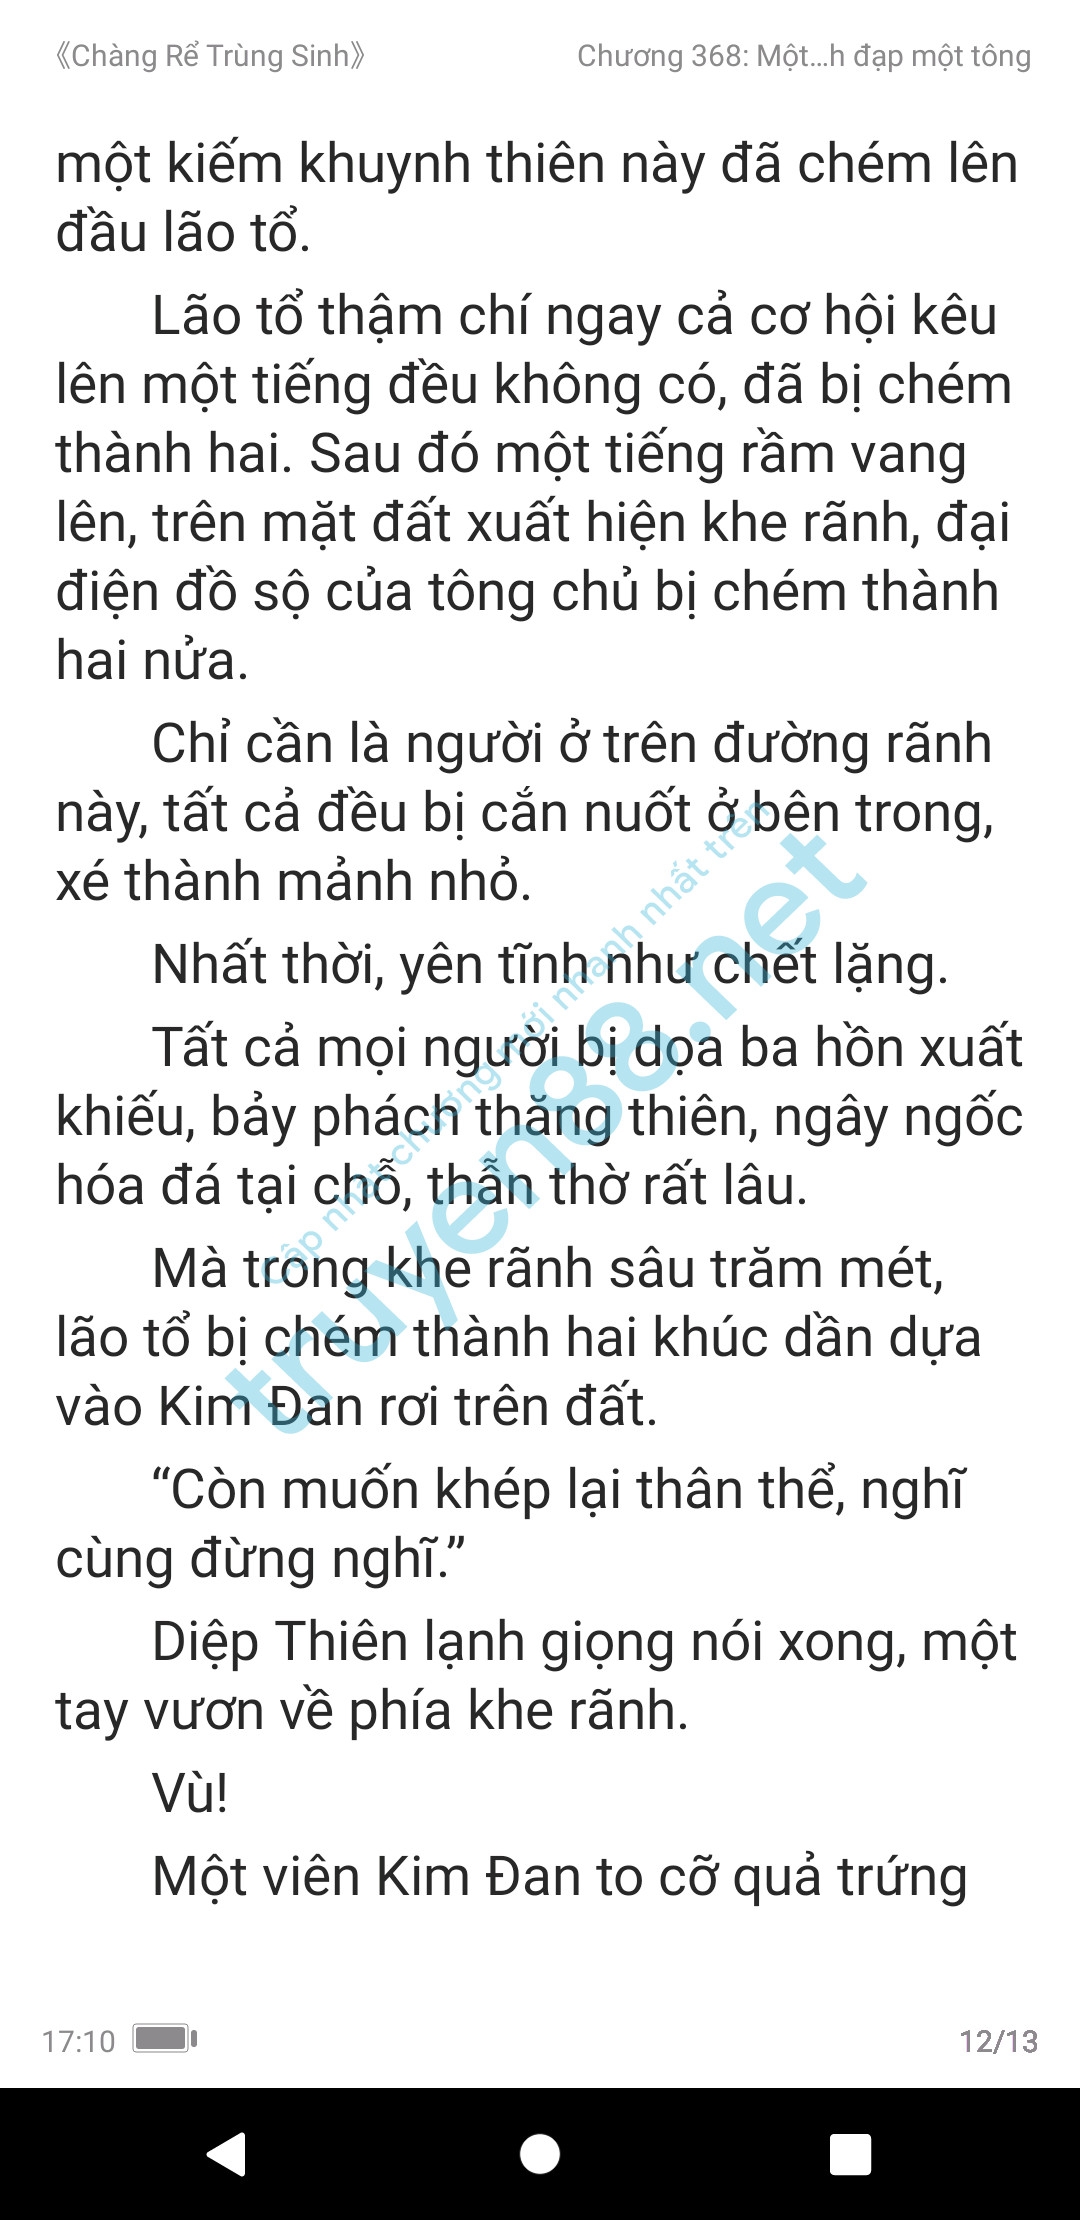 chang-re-trung-sinh-368-0